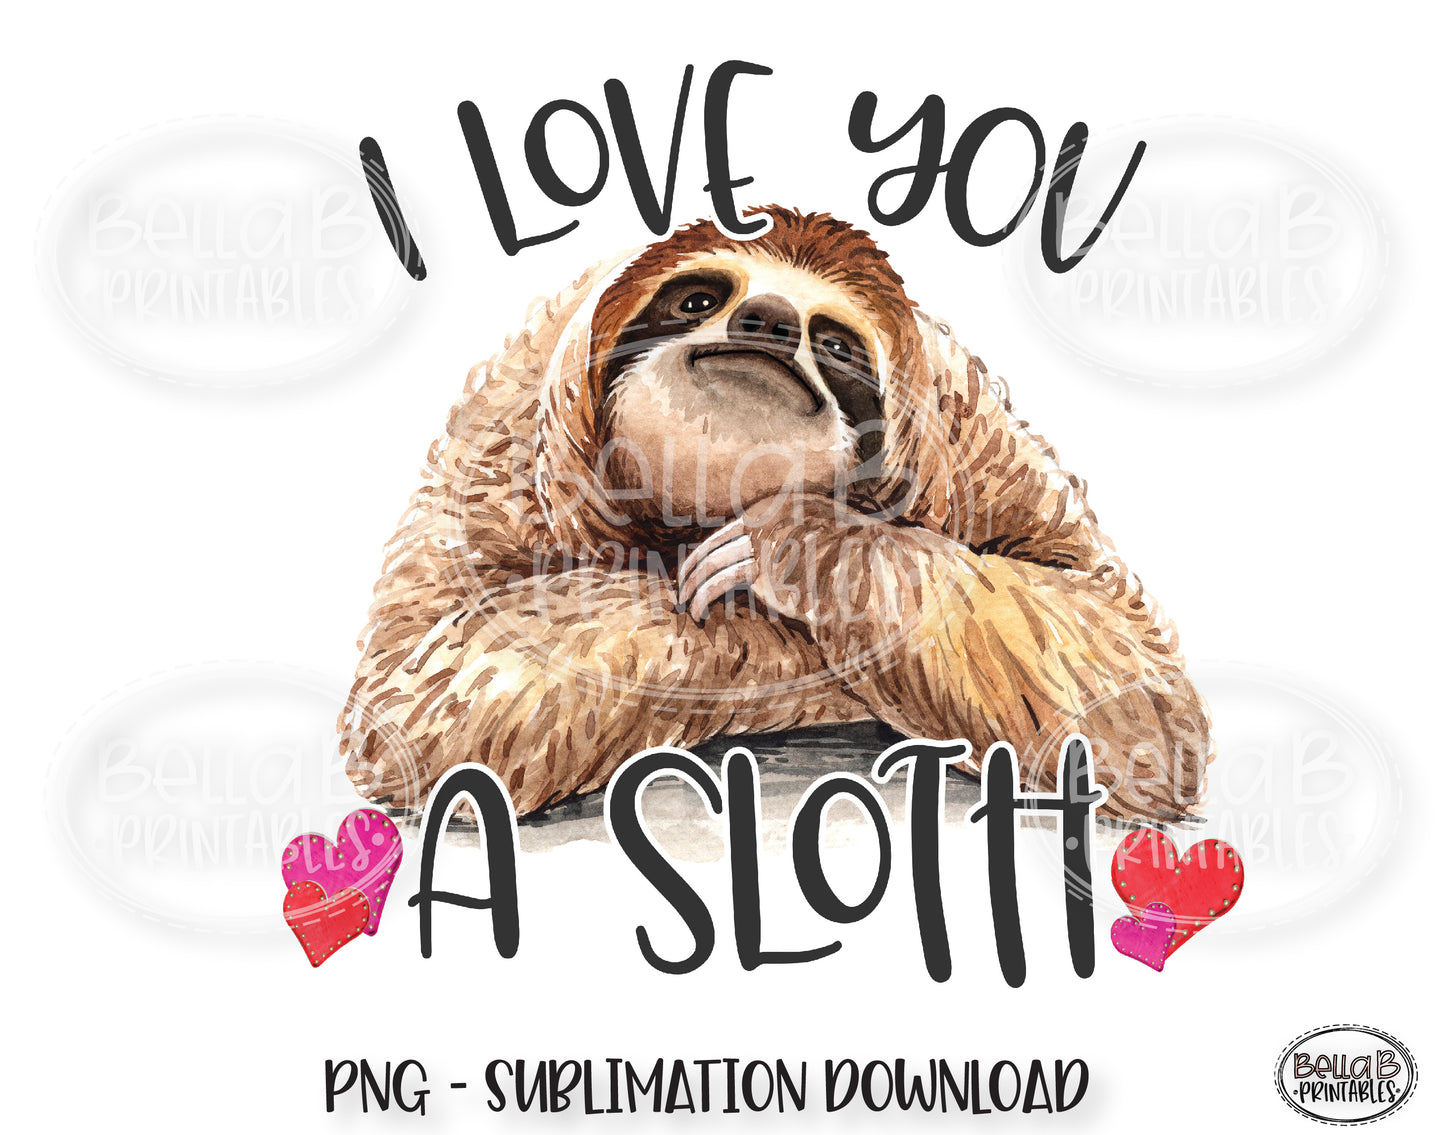 Sloth Valentine's Day Sublimation Design, I Love You A Sloth